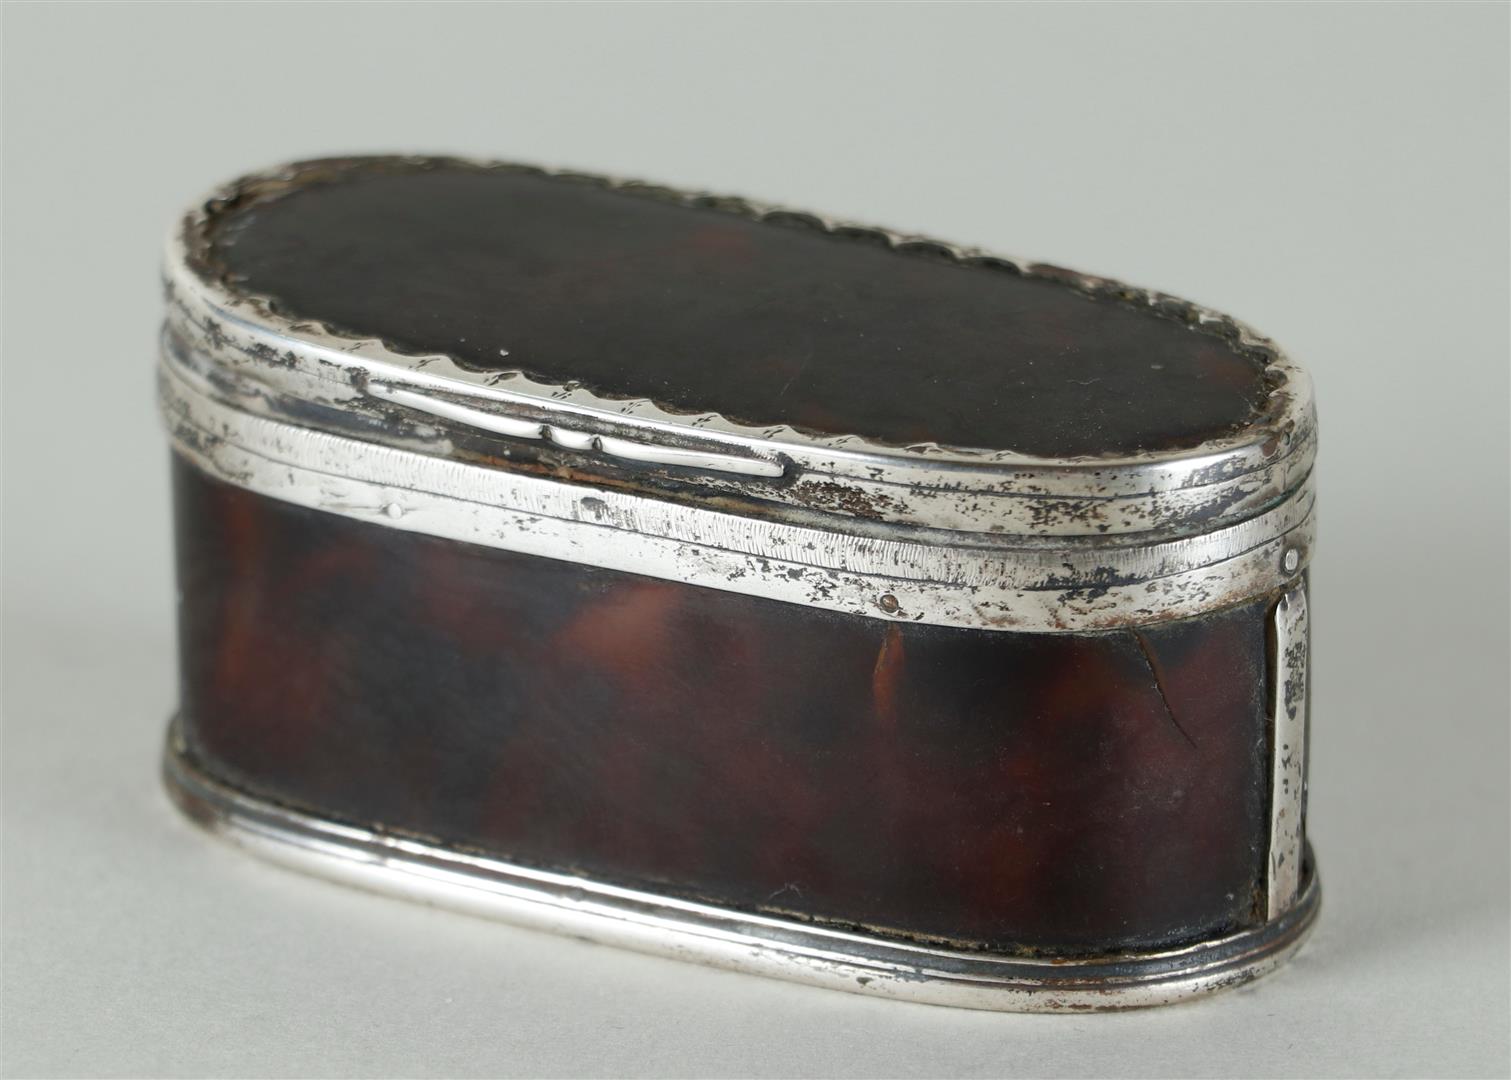 Tortoise Snuff Box with Silver Frames (Holland, 17th Century) - Image 4 of 7